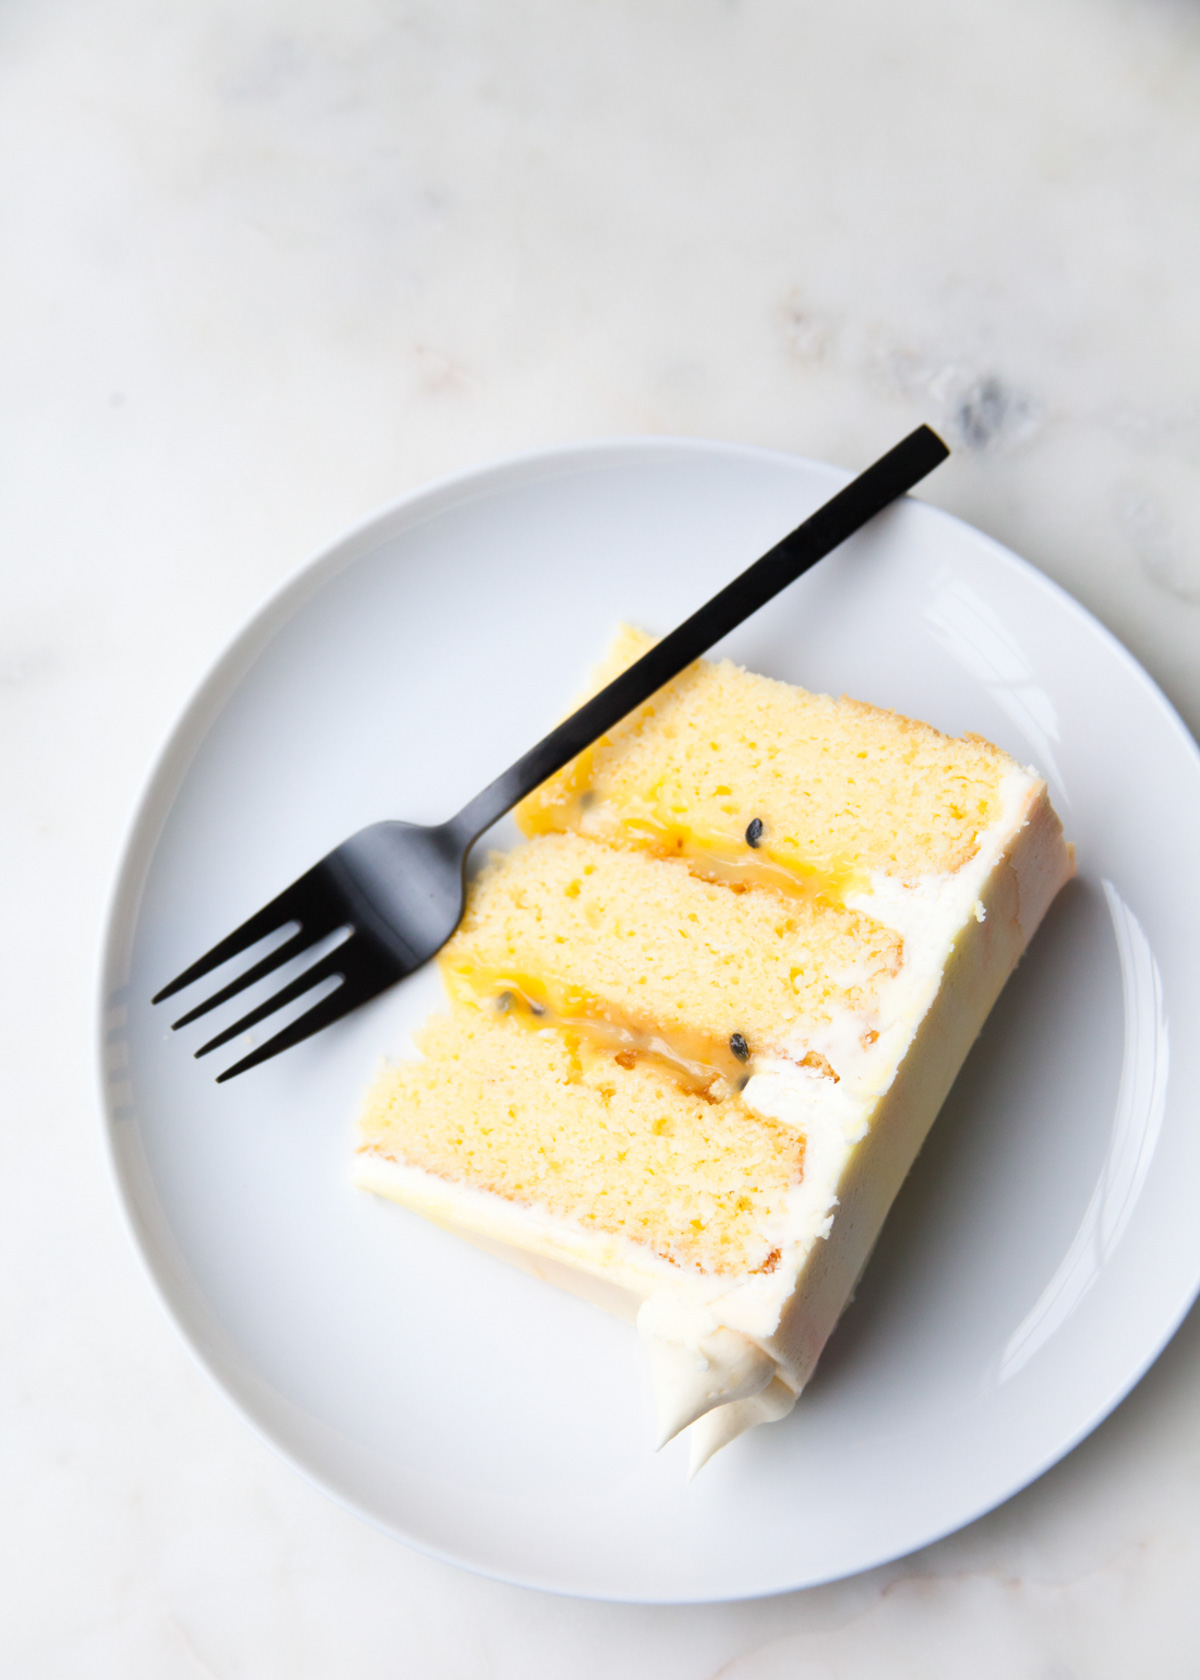 A slice of 3-layer passion fruit cake on a plate